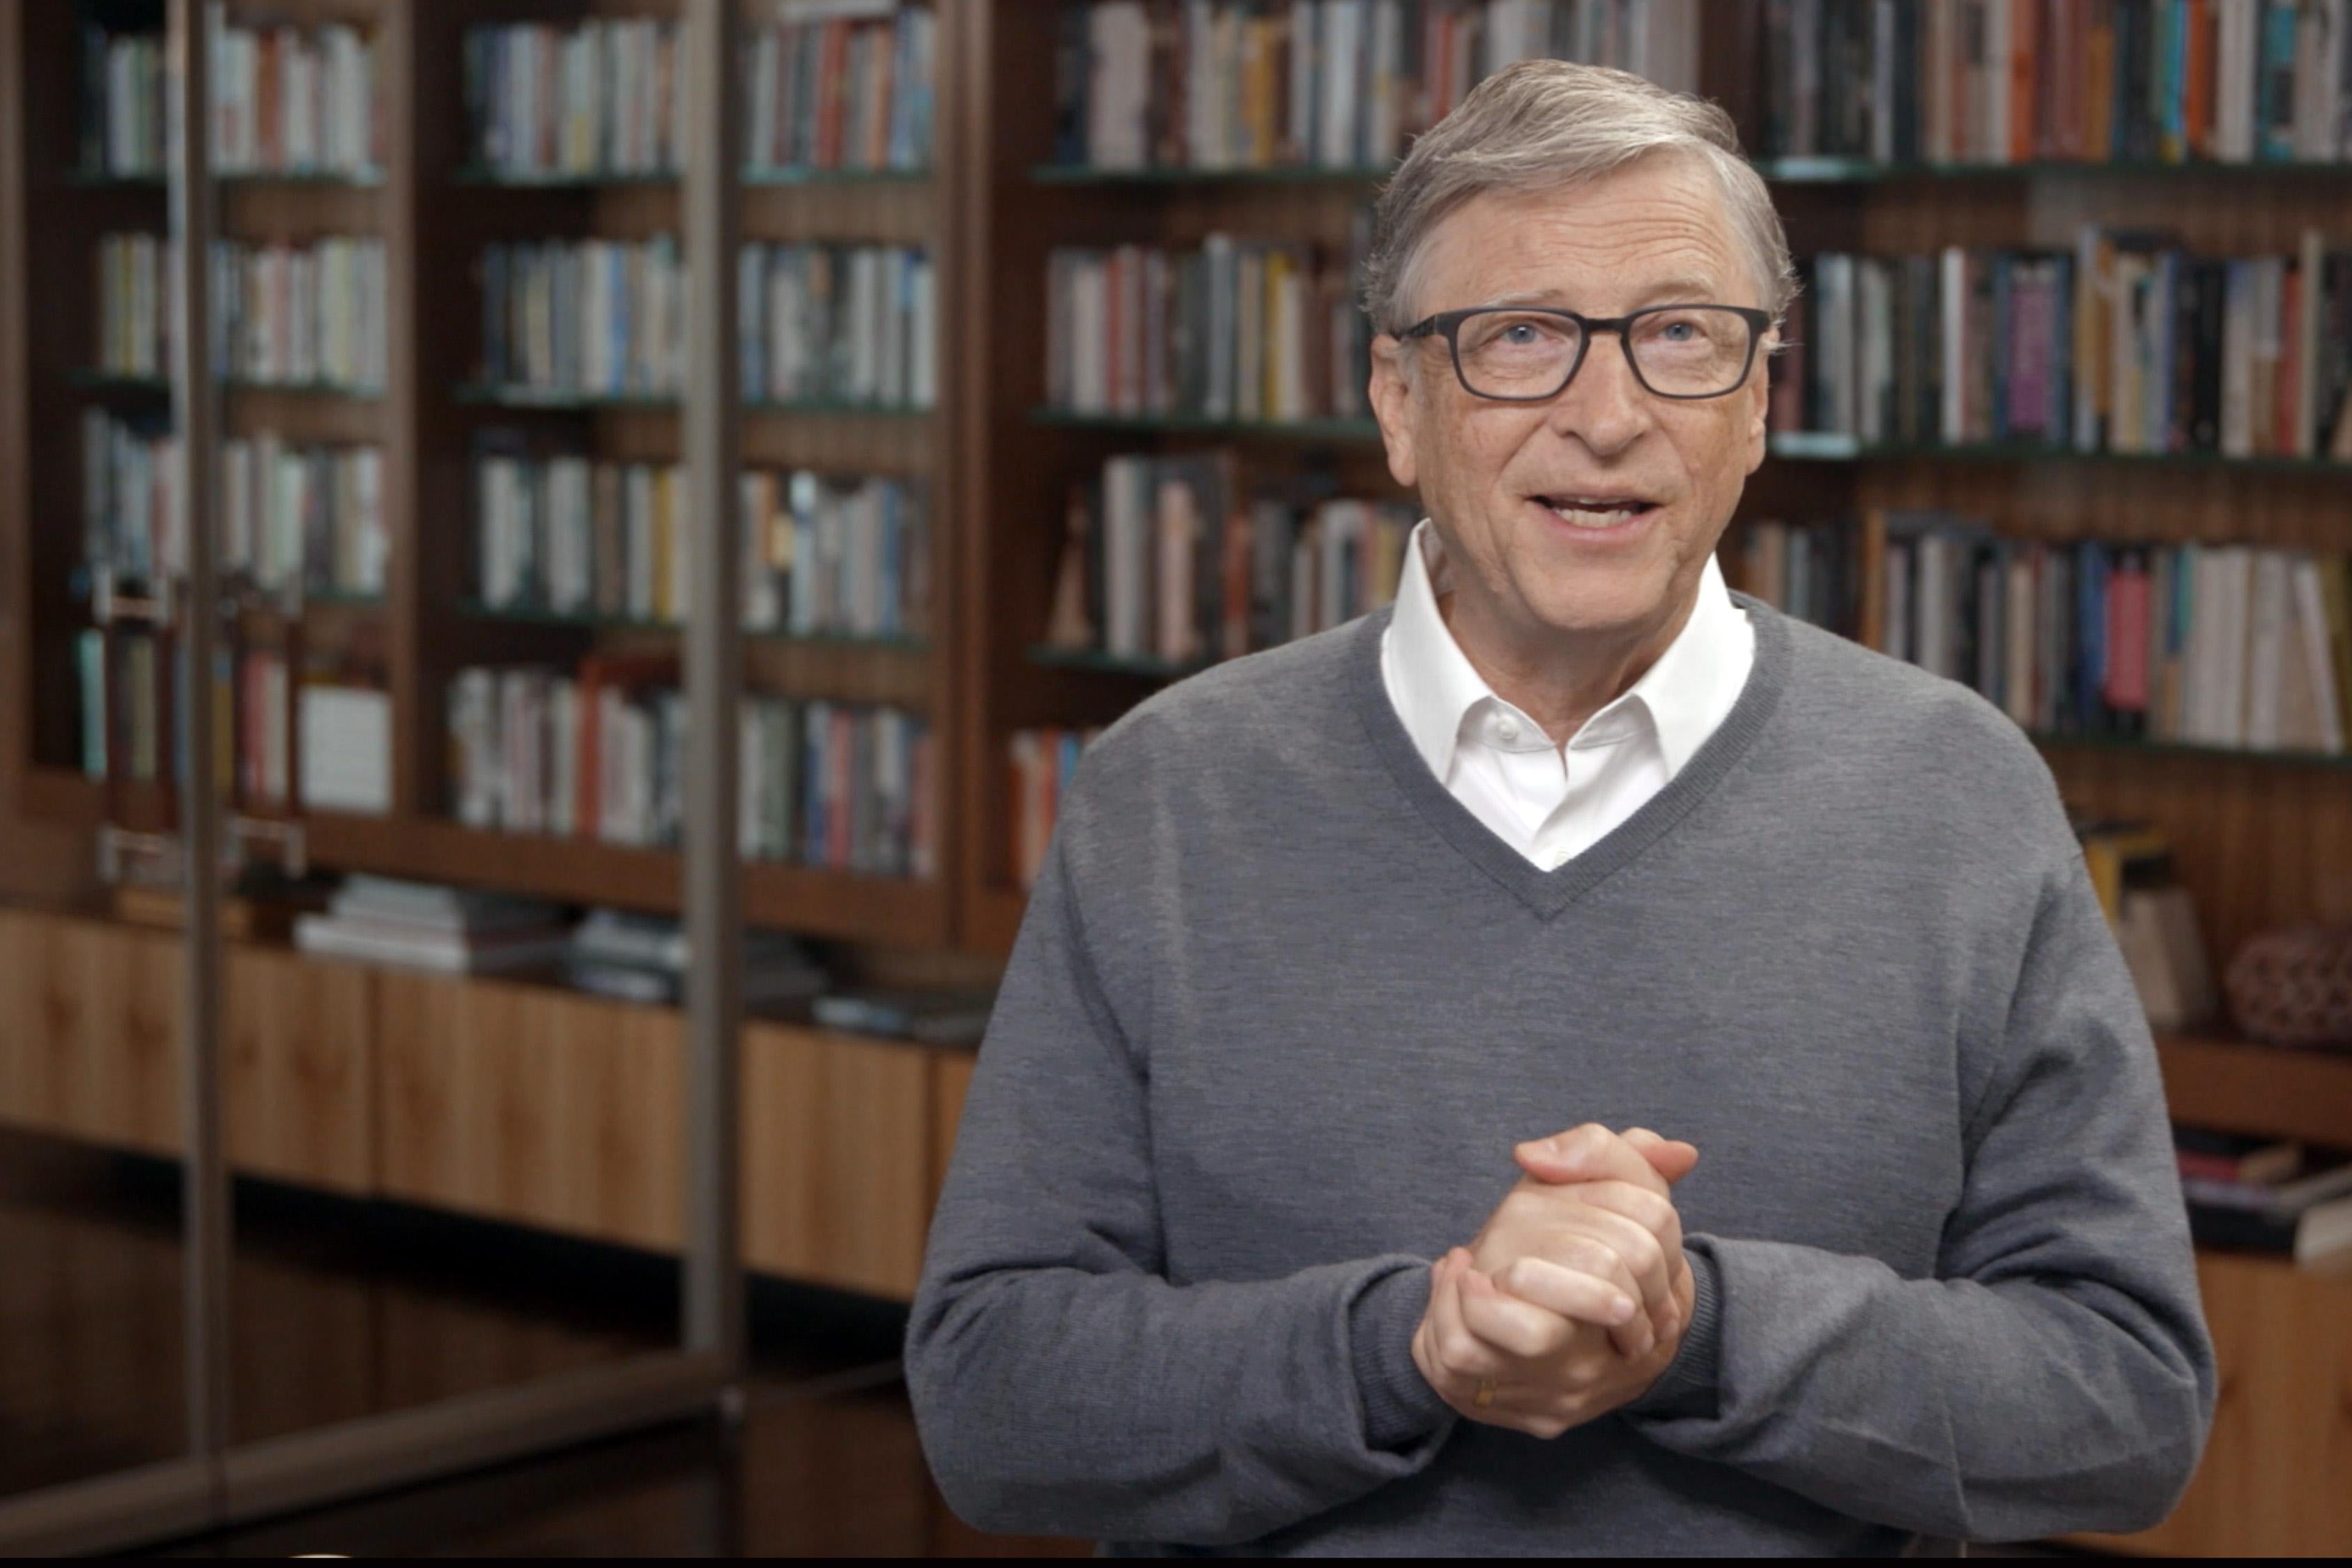 Bill Gates clasps his hands in front of bookshelves.